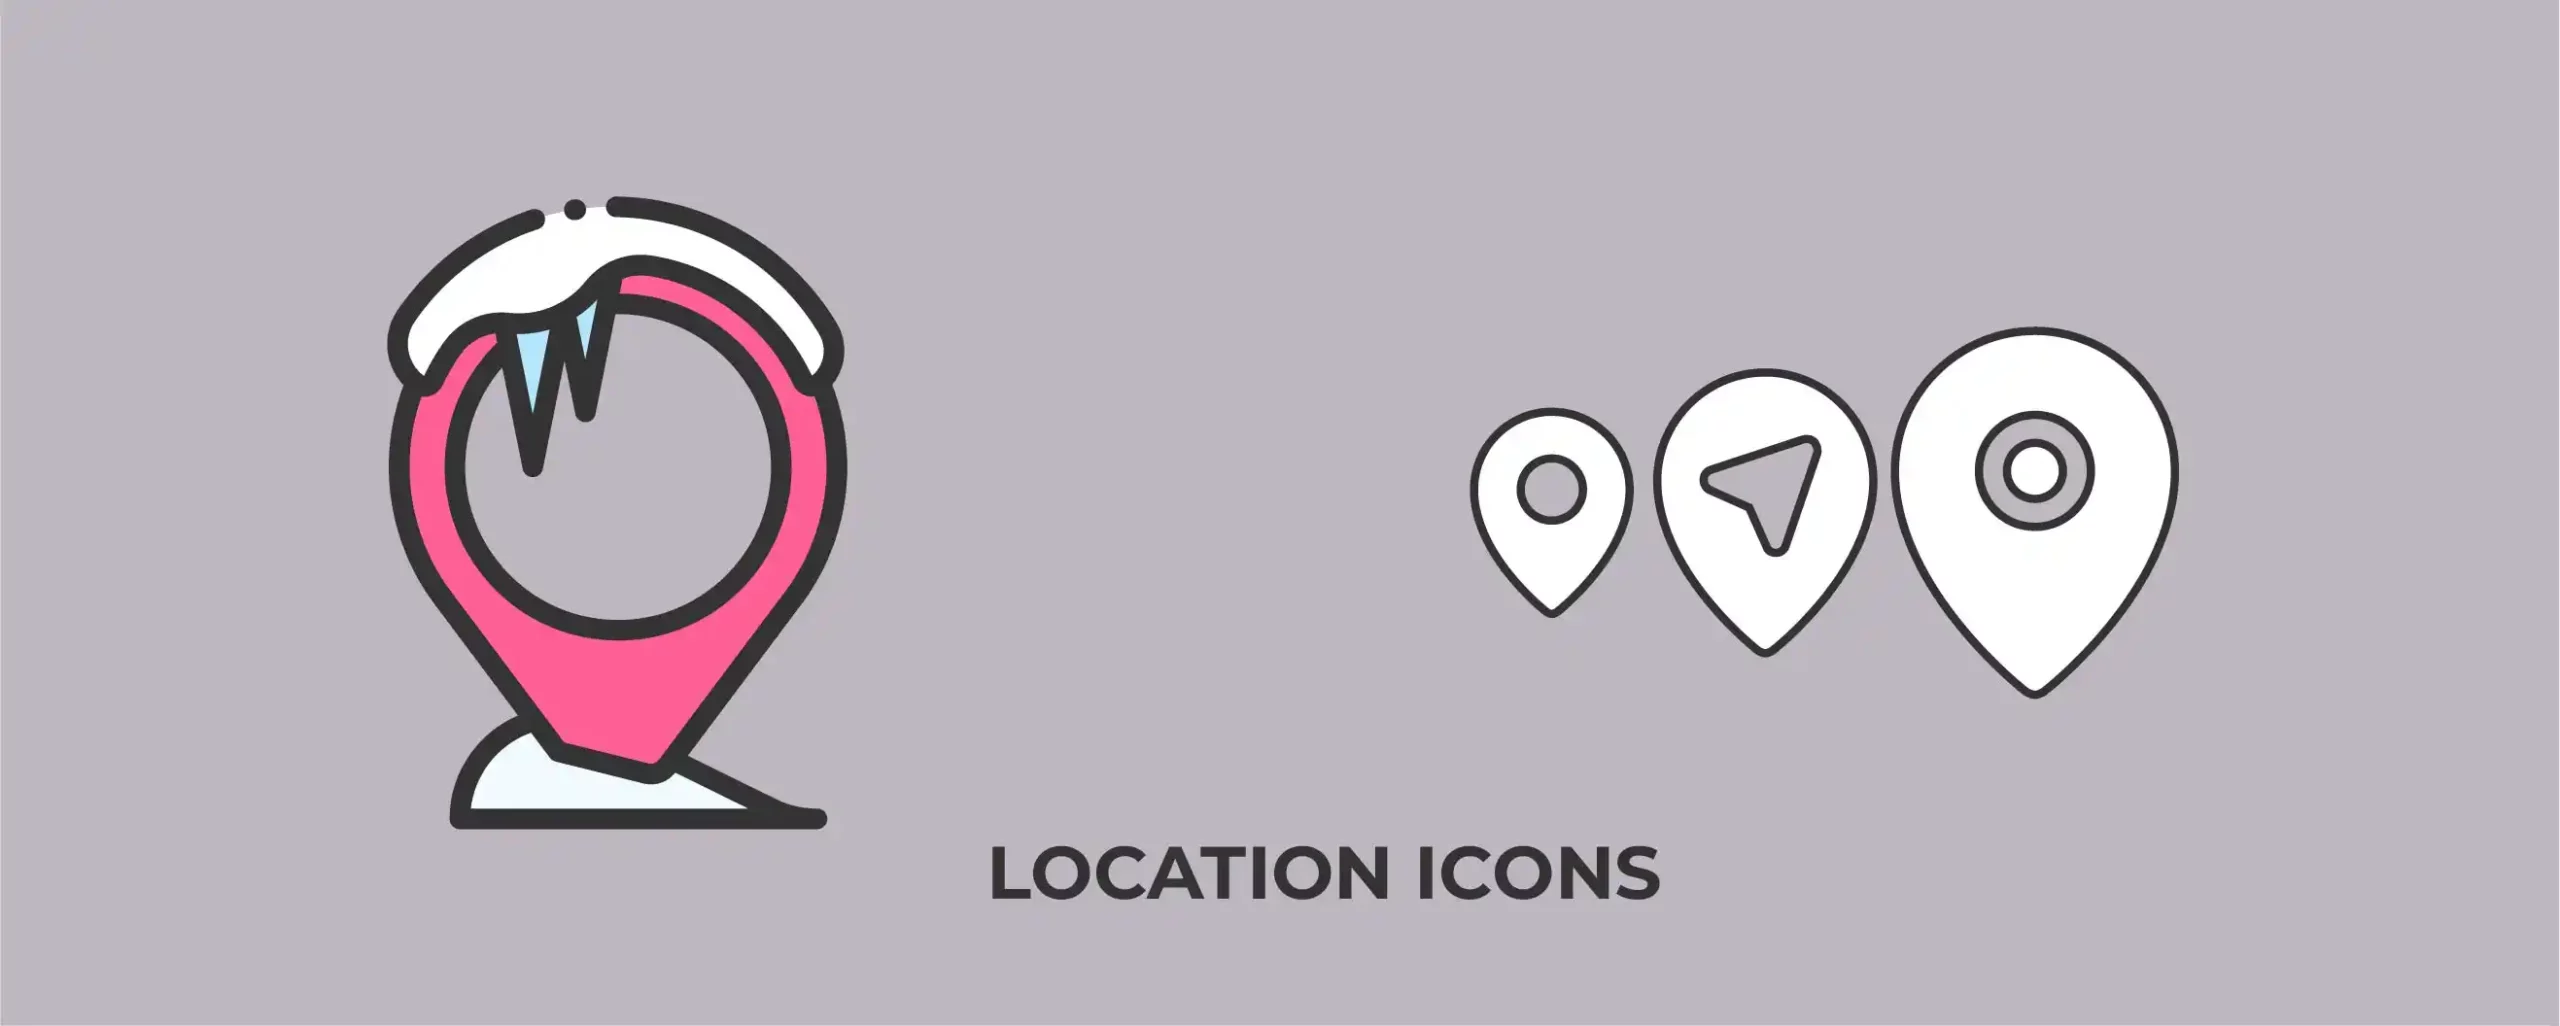 Location icons for you